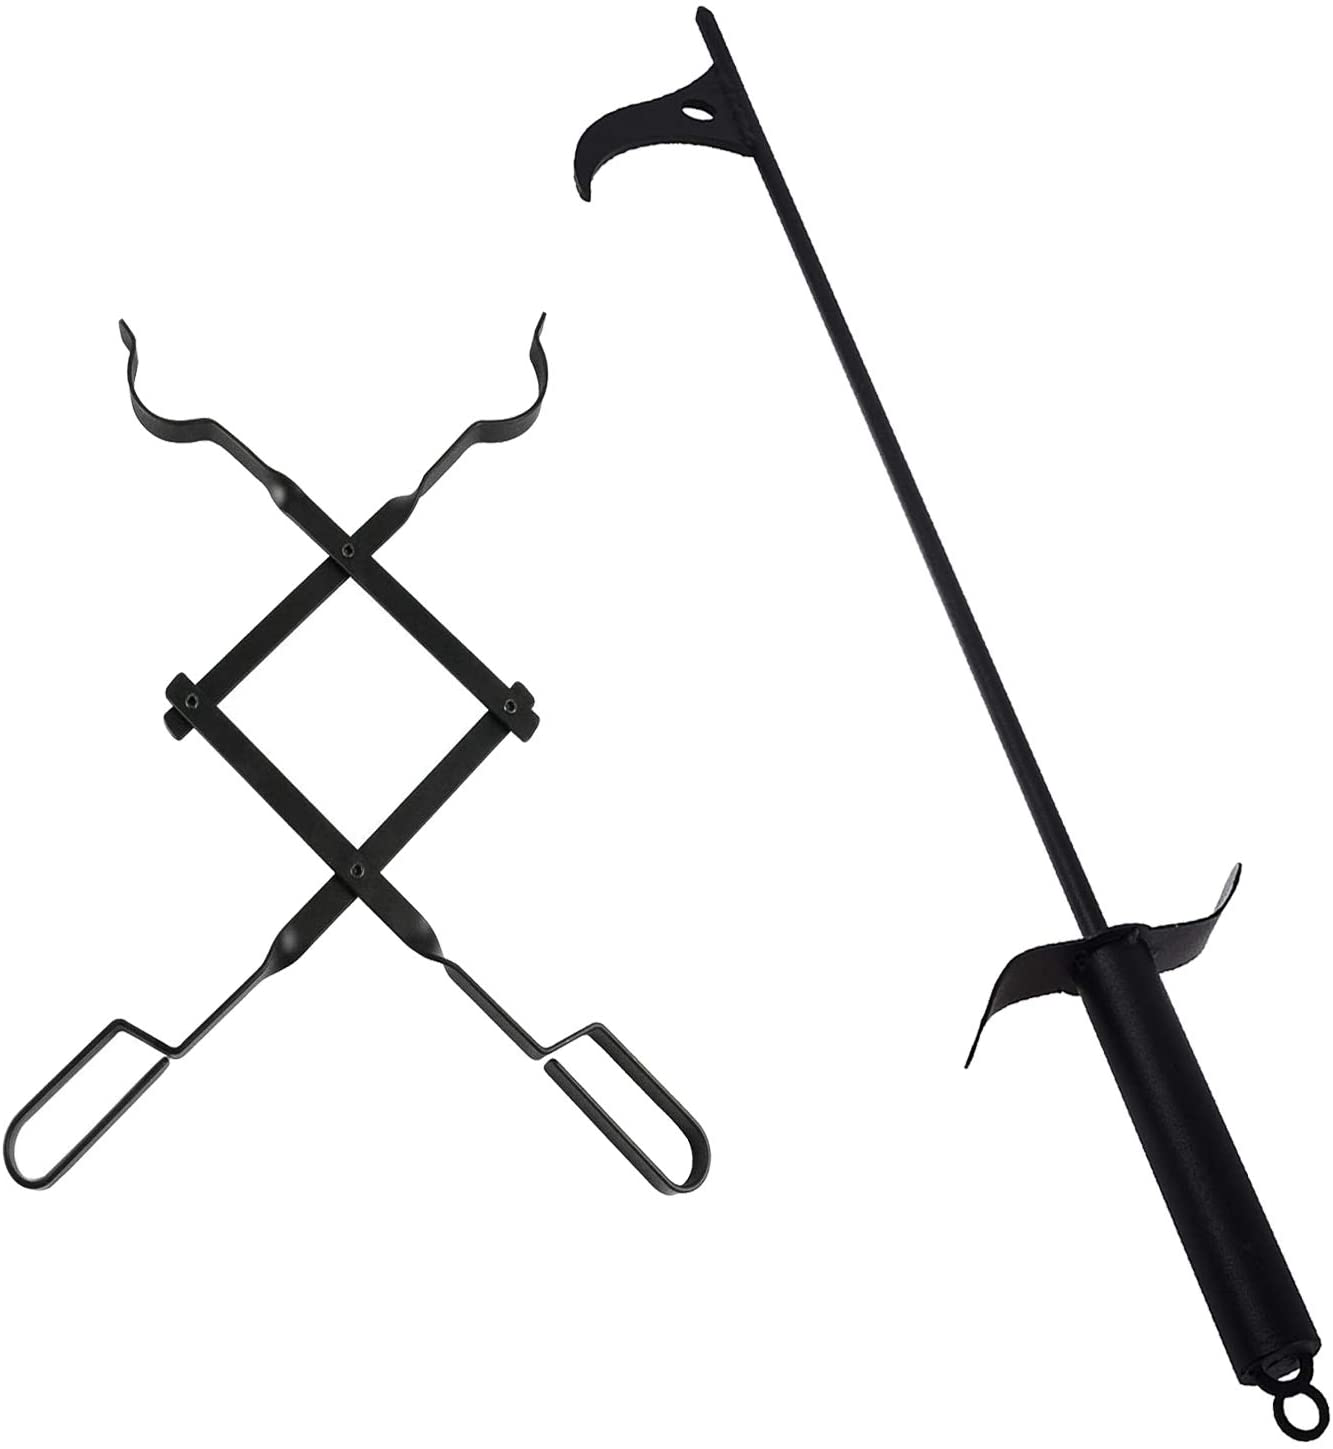 bbq777 Fire Pit Tool Kits, 30" Fire Pit Poker and 26" Log Grabber Fireplace Tongs for Outdoor Campfire, Camping, Wood Stove, Black